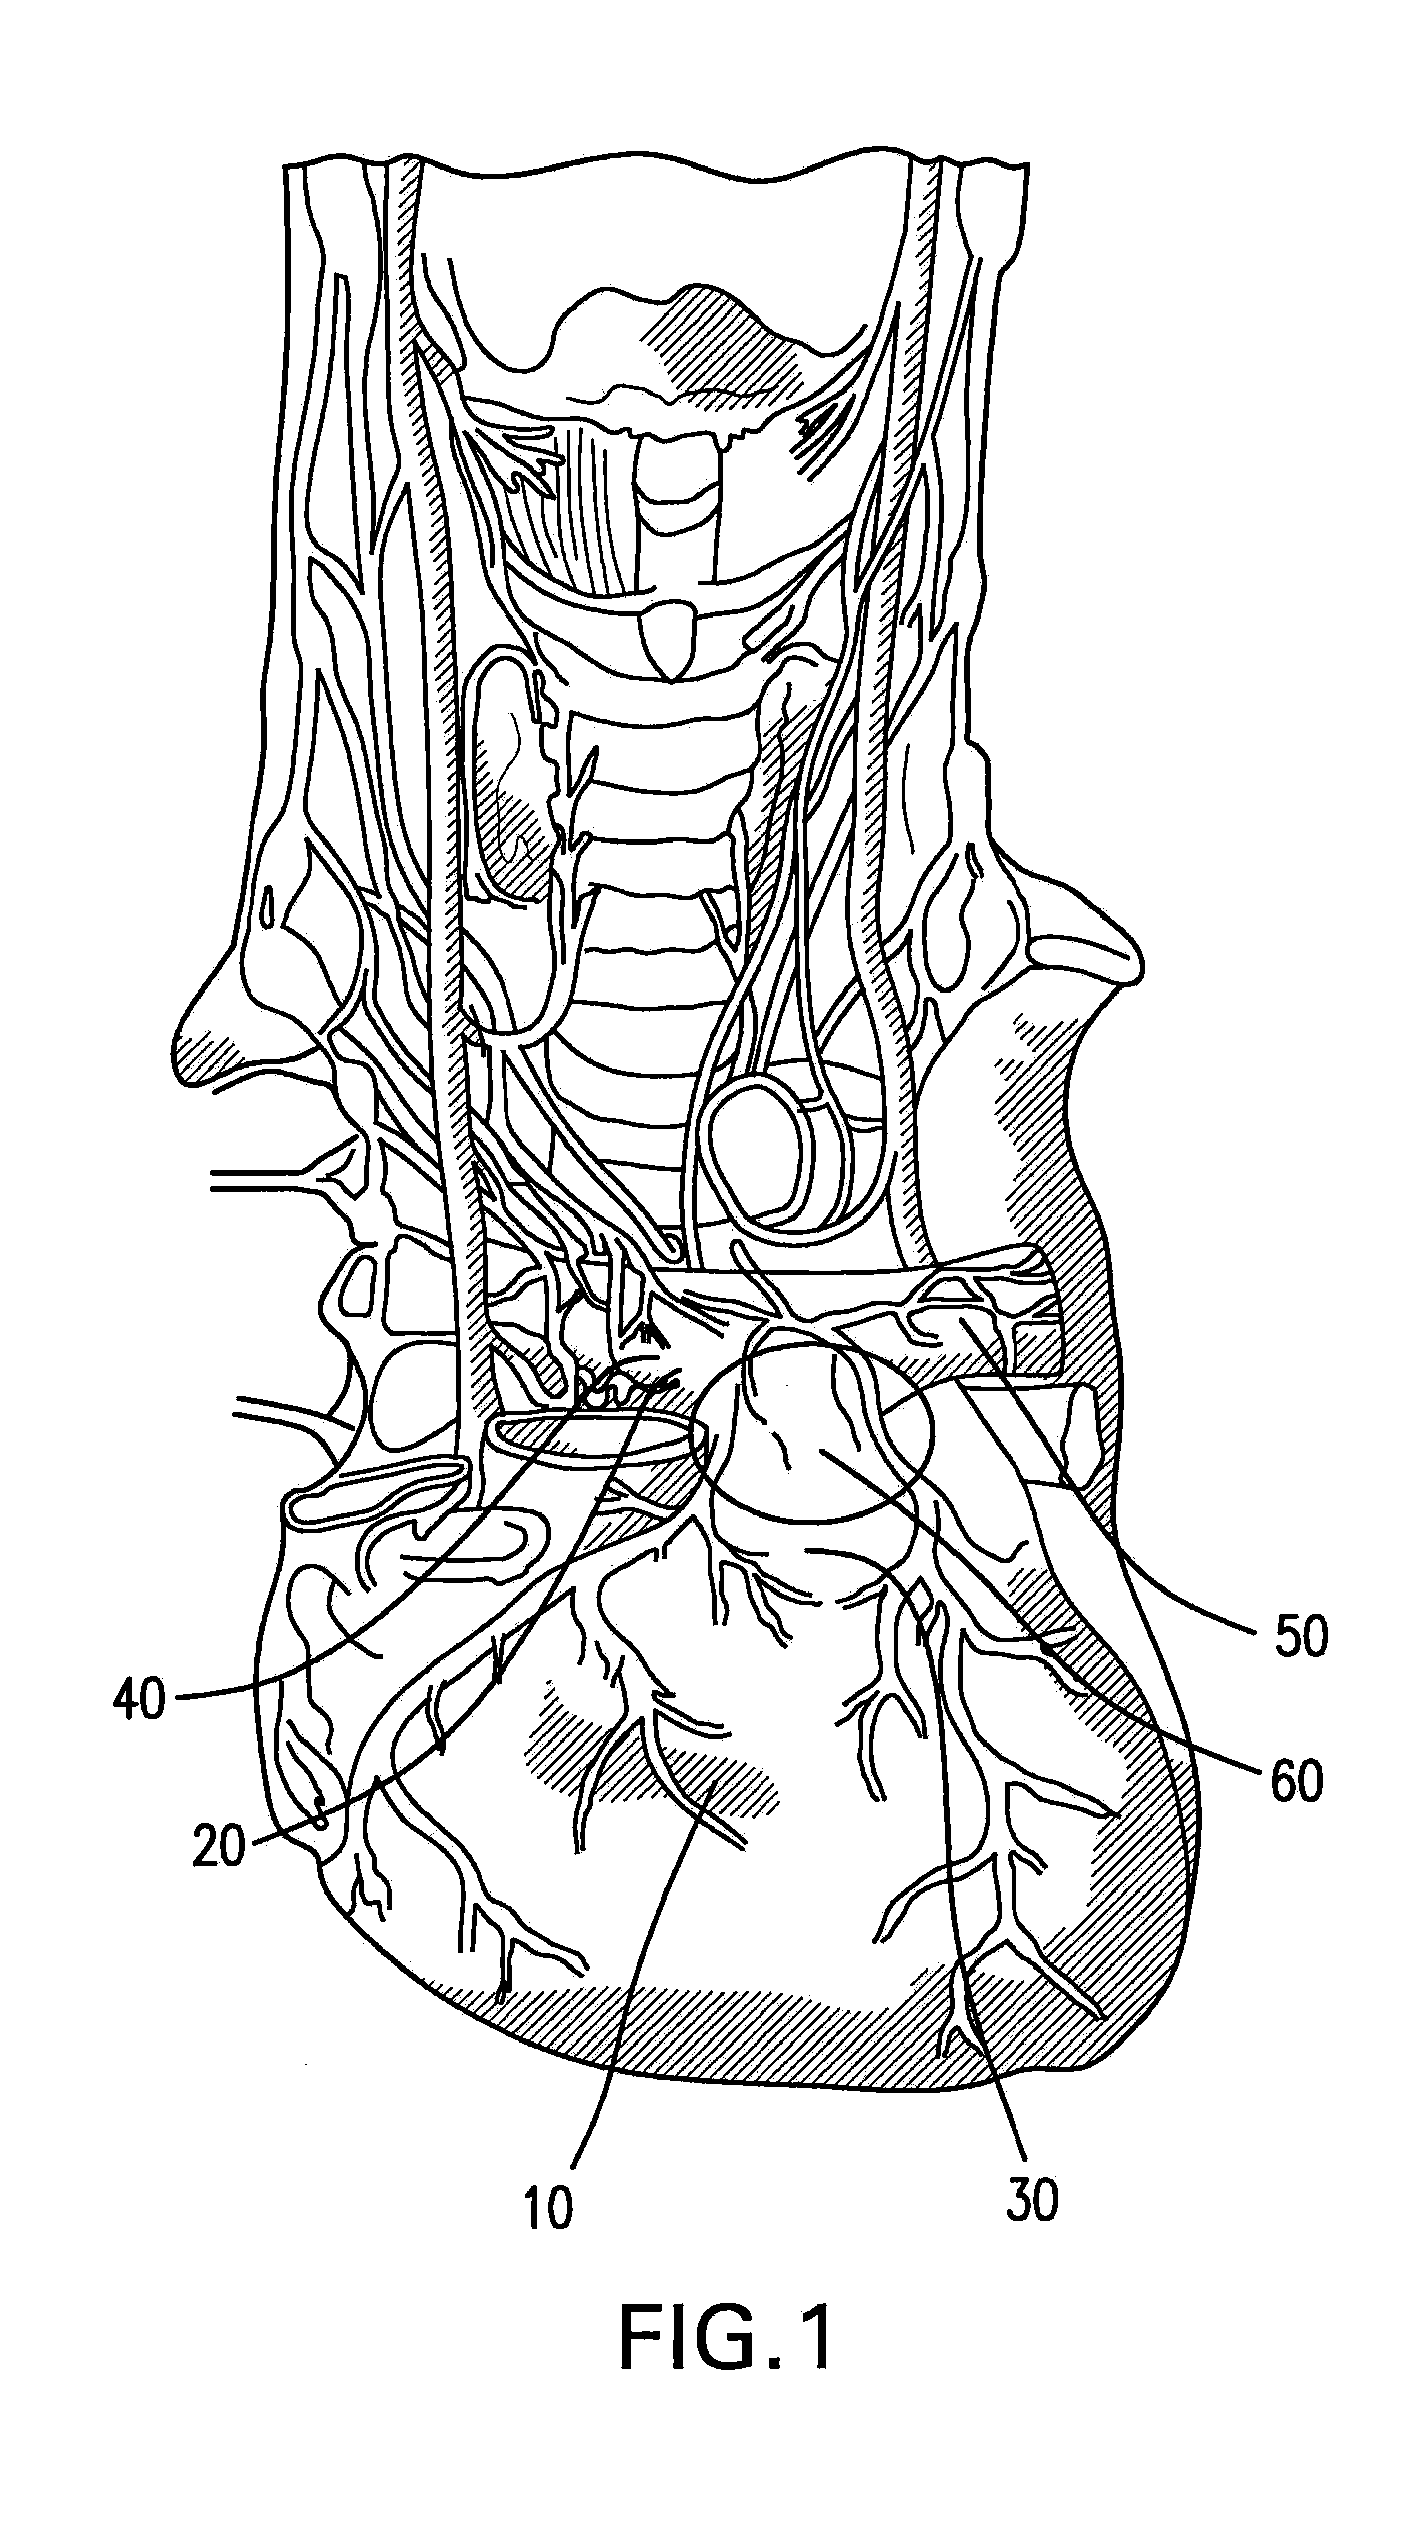 Method and System for Treating Acute Heart Failure by Neuromodulation